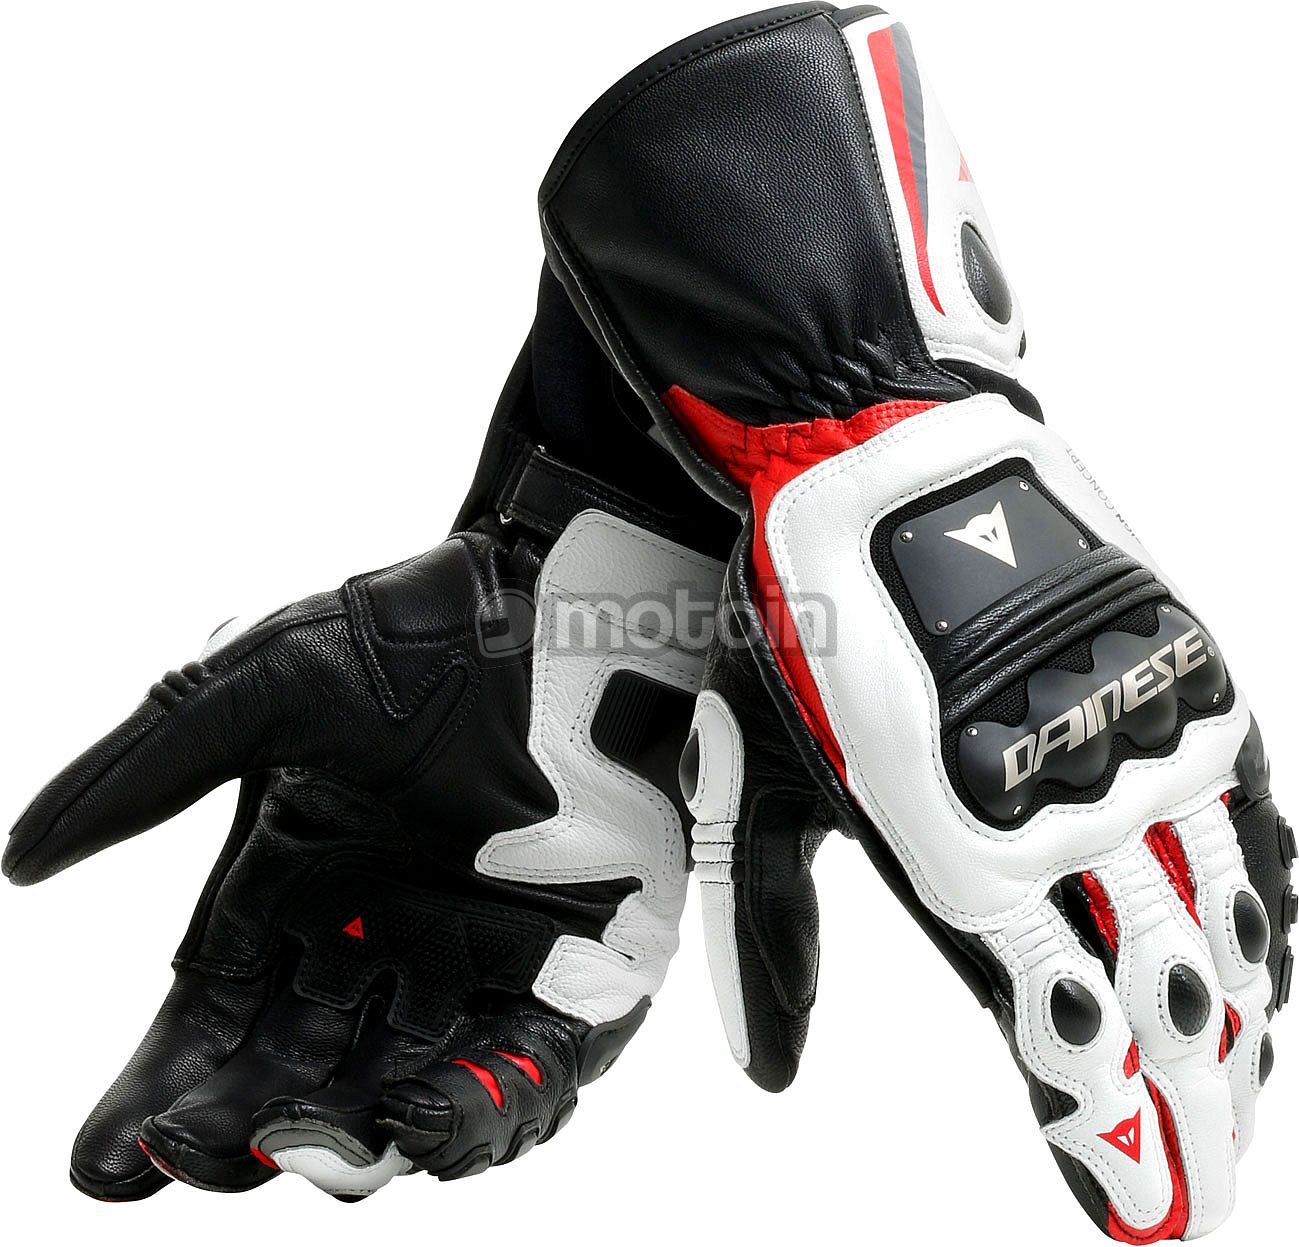 Dainese Steel-Pro, guantes